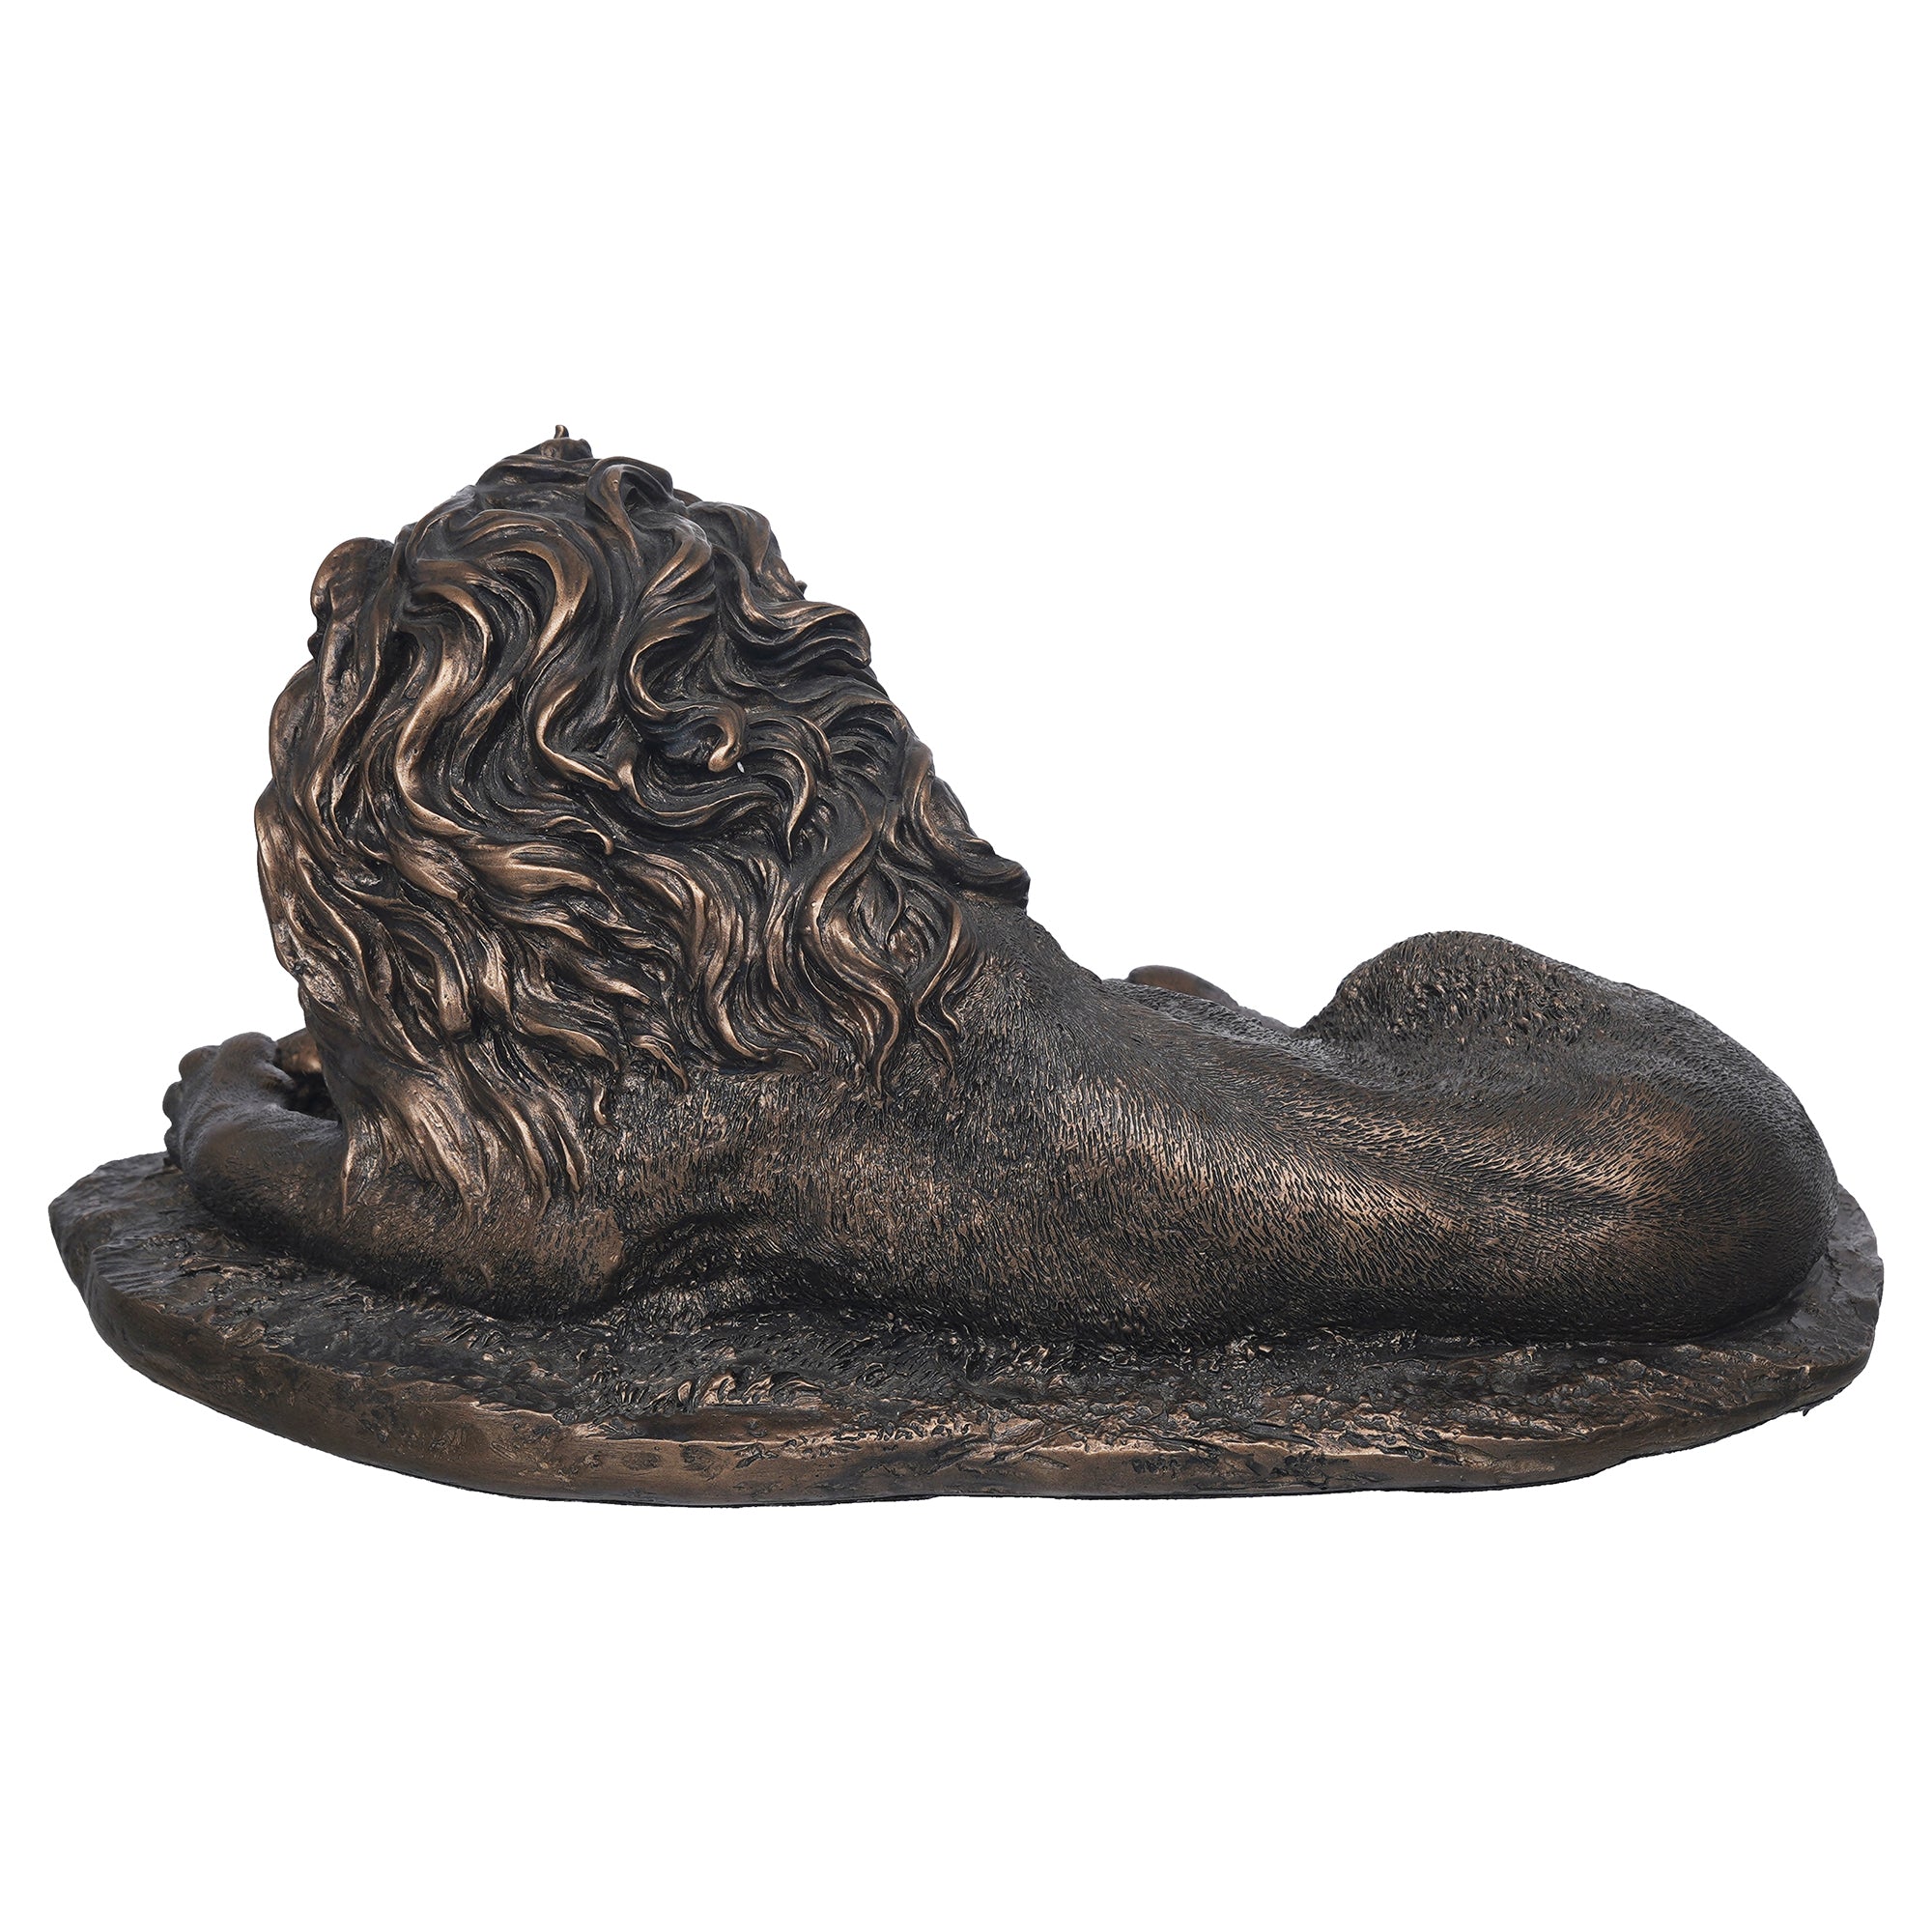 eCraftIndia Rustic Gold Forest King Lion Statue Sitting on Rock 8